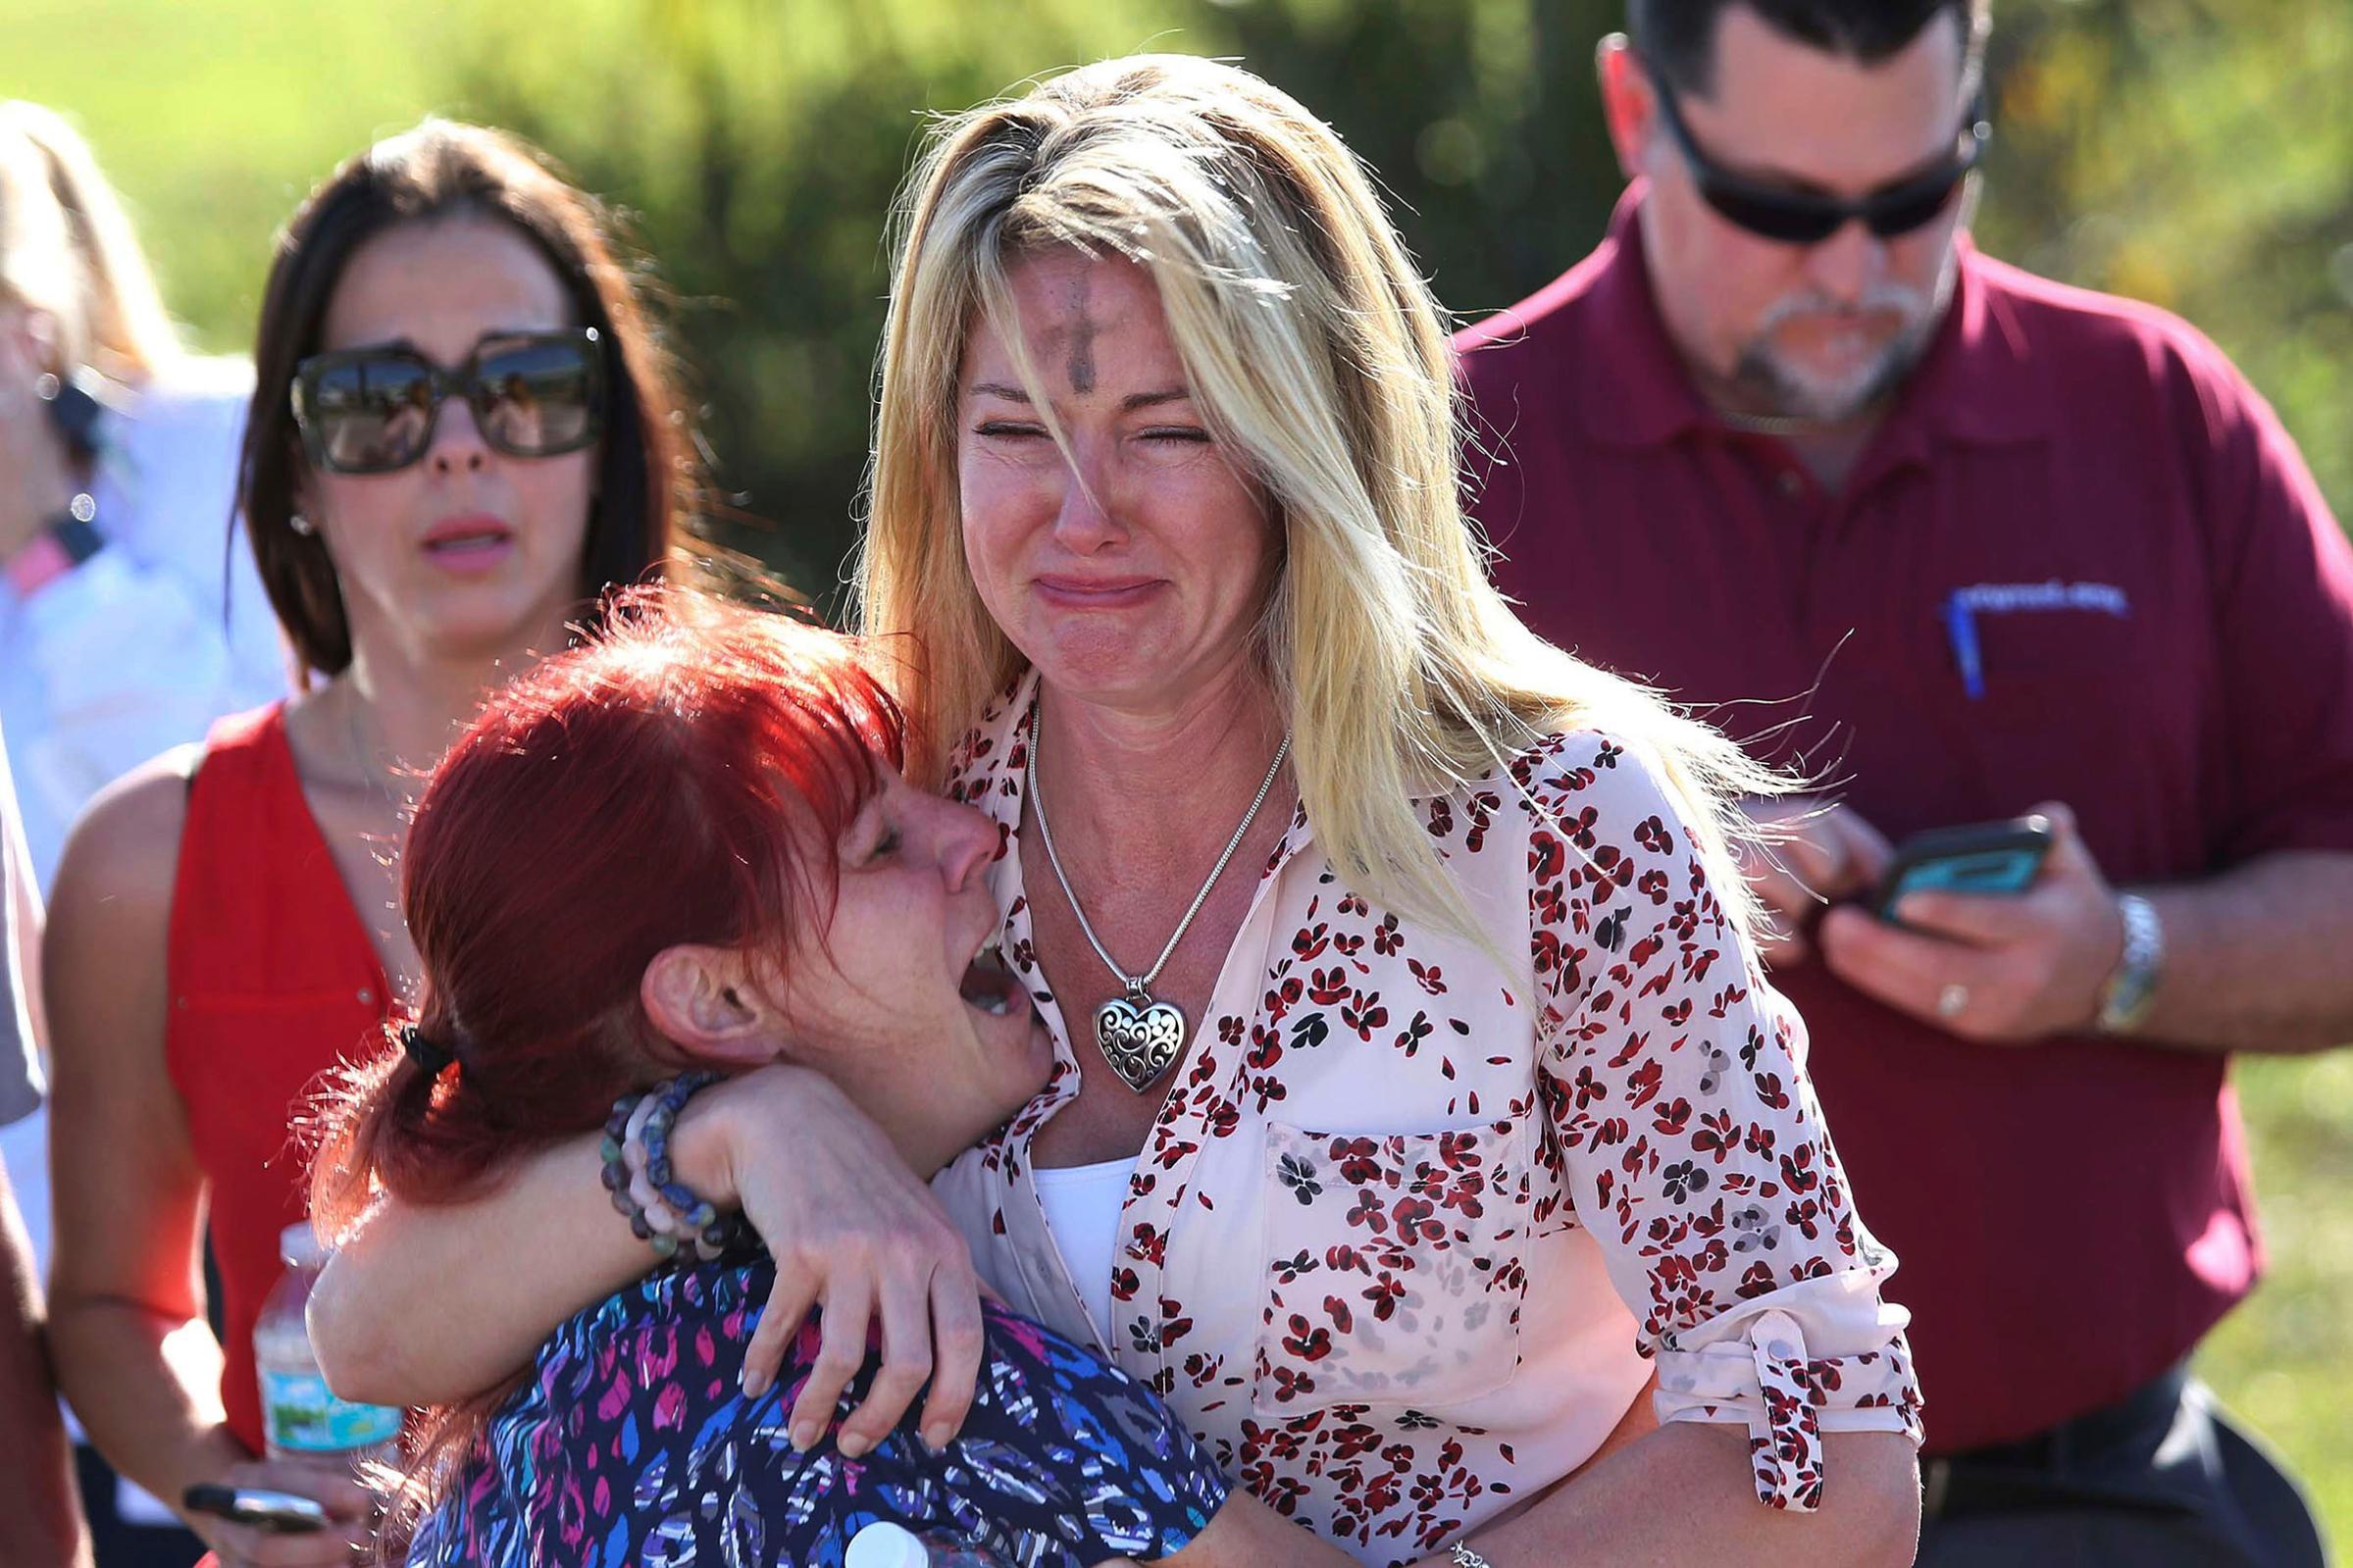 Parents wait for news after a reports of a shooting at Marjory Stoneman Douglas High School in Parkland, Fla., on Feb. 14, 2018.